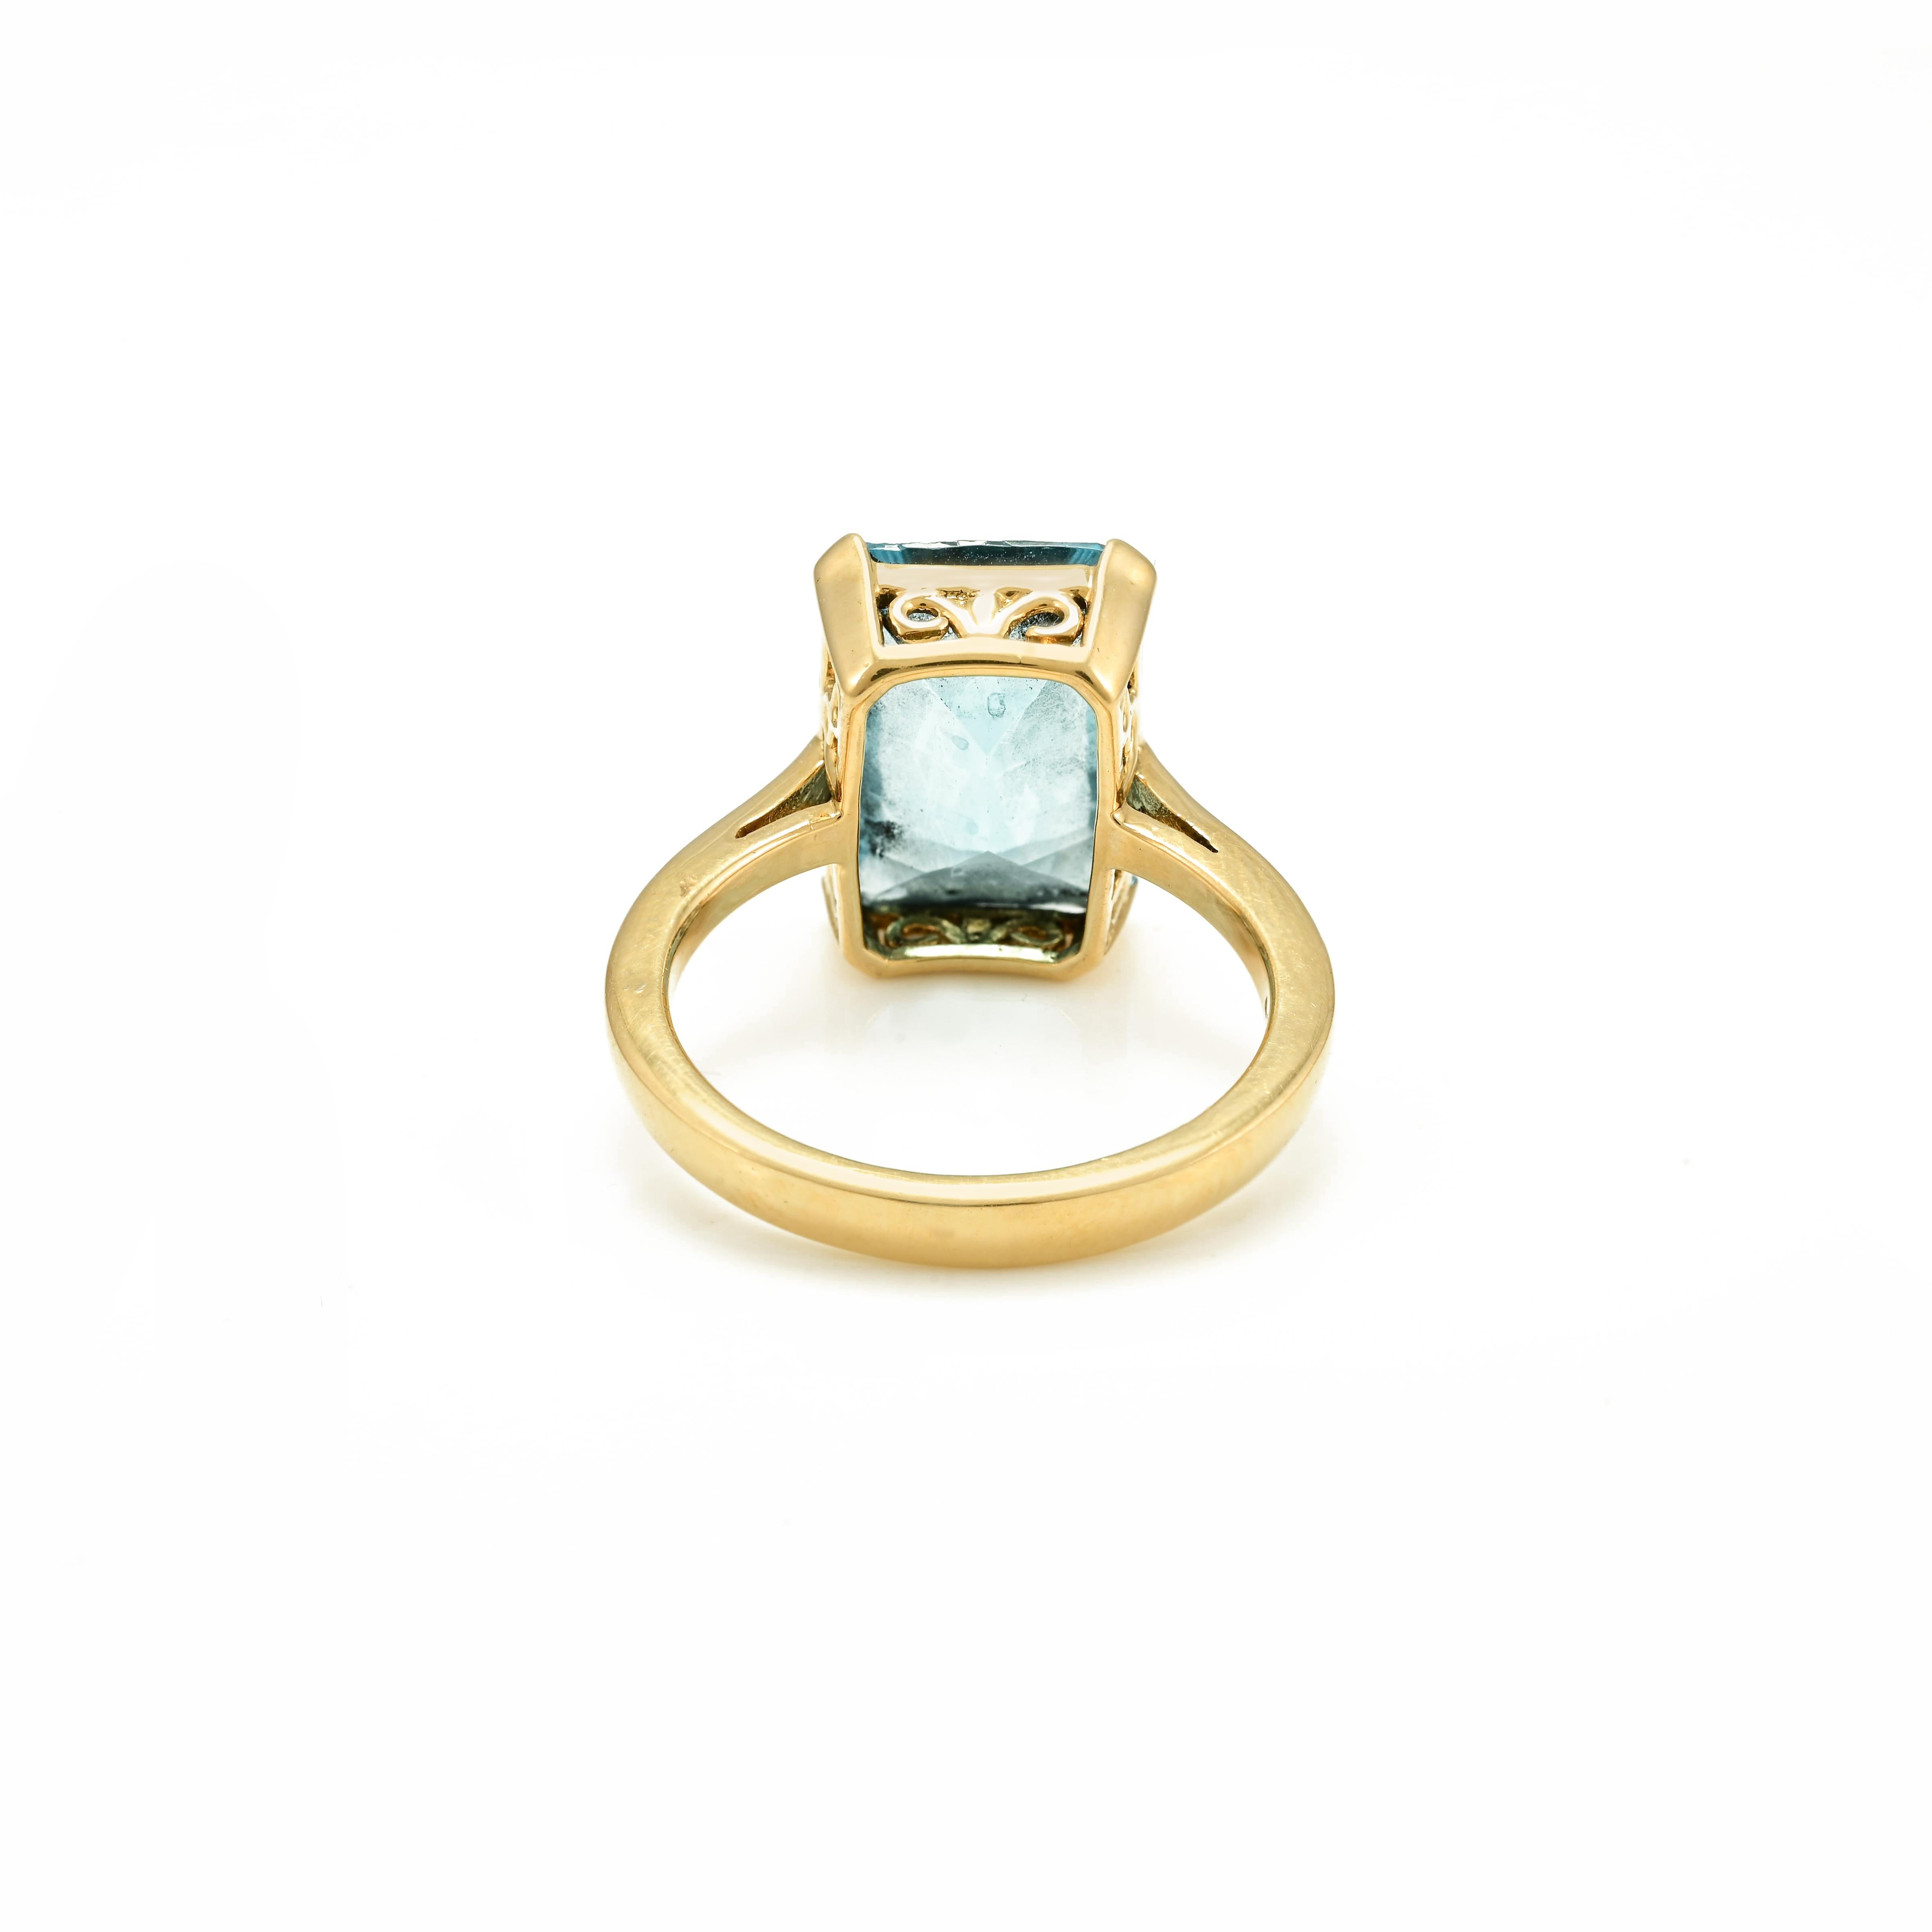 For Sale:  7.2 CTW Octagon Cut Swiss Blue Topaz Single Stone Ring 18k Solid Yellow Gold 5